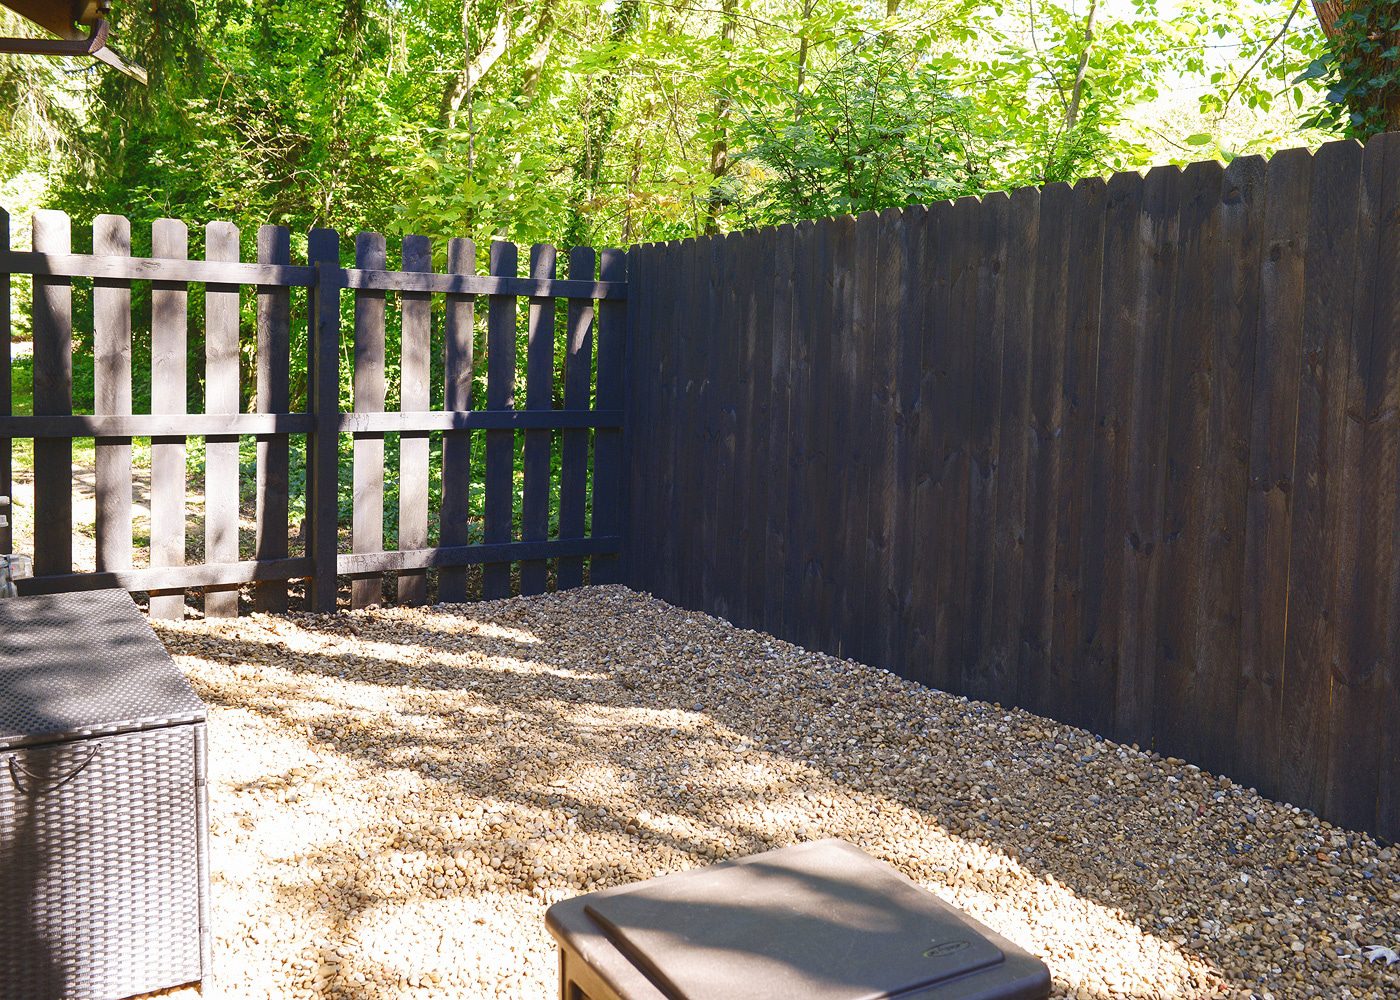 Our 3 day 'Flip the Yard' backyard makeover with Troy-Bilt | via Yellow Brick Home